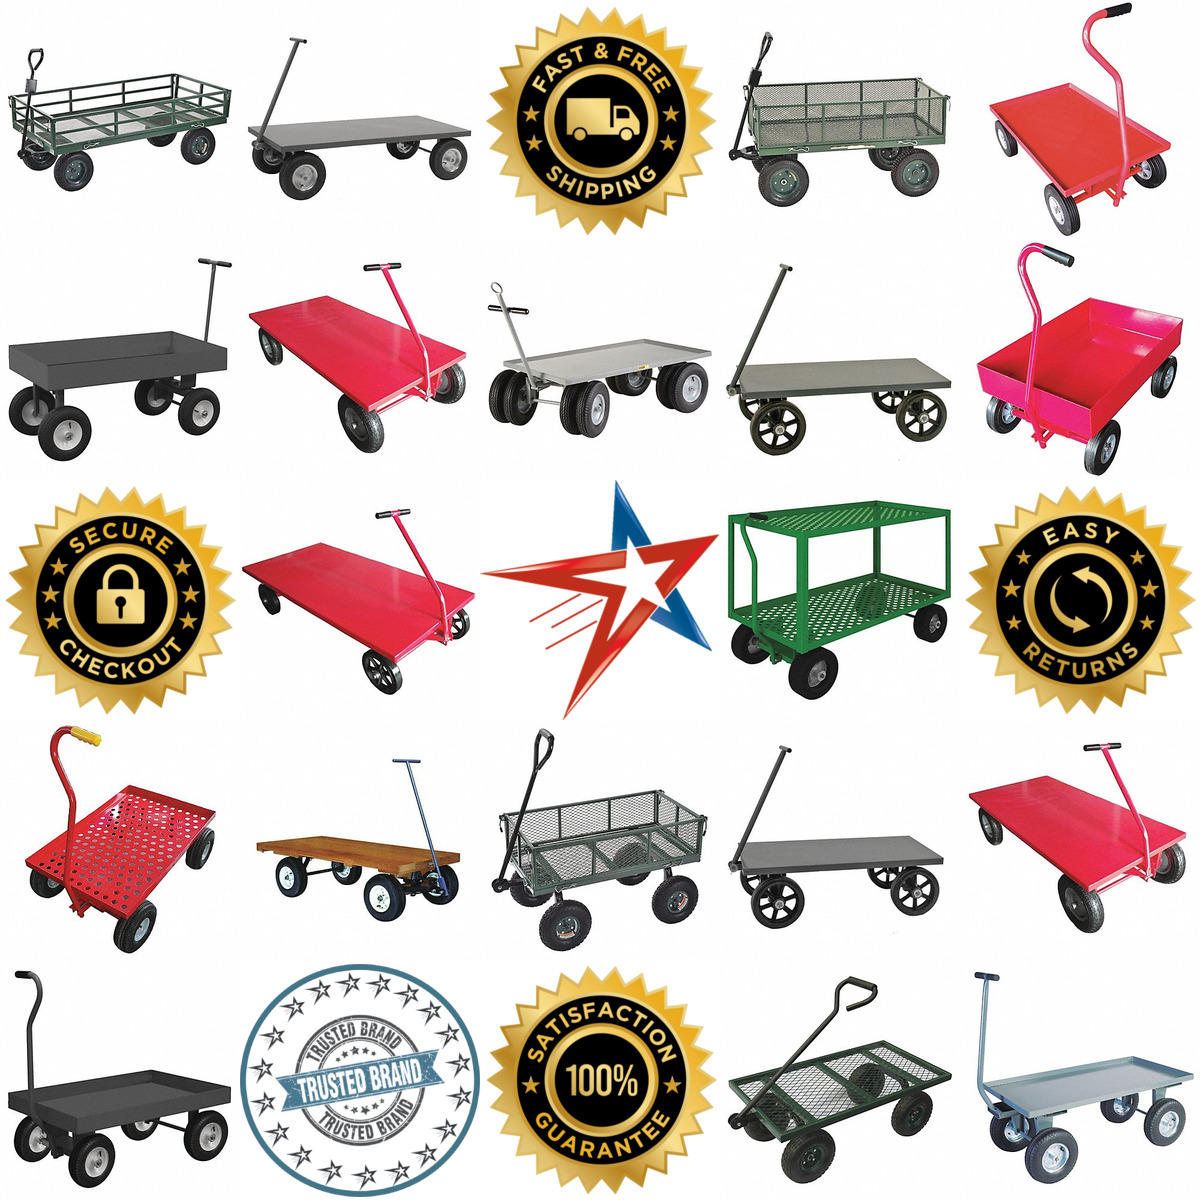 A selection of Wagon Trucks products on GoVets